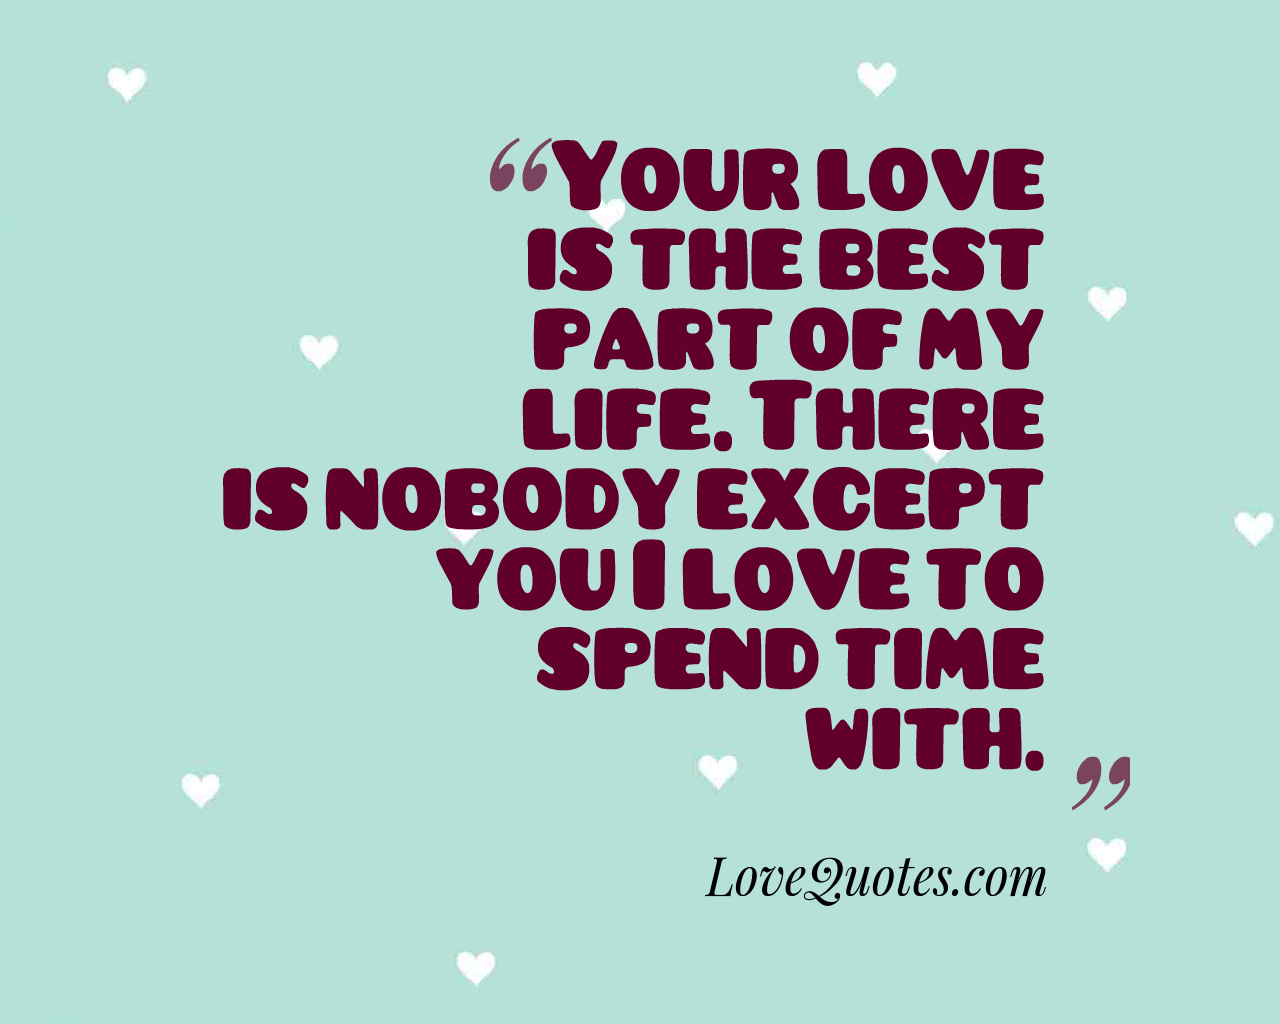 Best Part Of My Life Love Quotes By Ela Eren Funny Quotes Medium